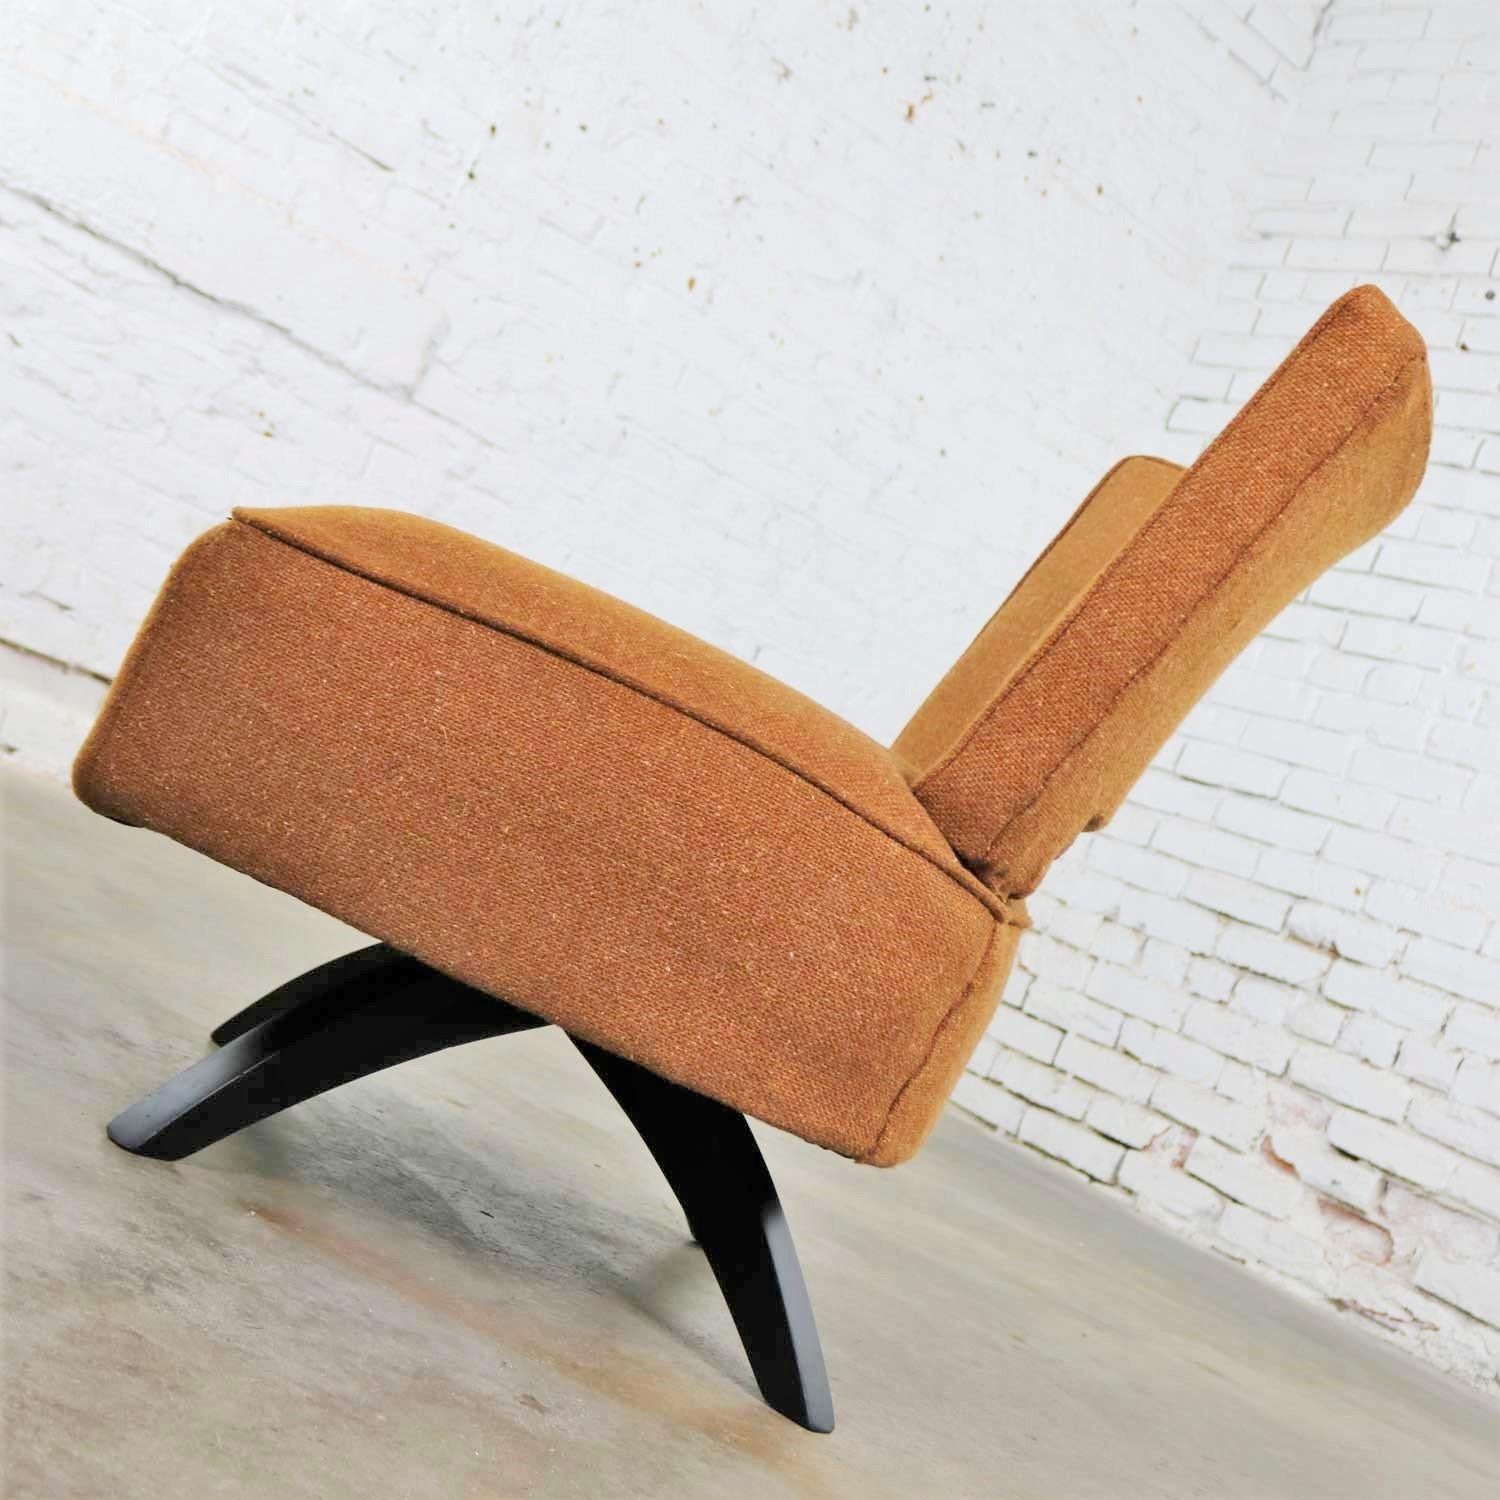 Painted Mid-Century Modern Swivel Slipper Chair Attributed to Kroehler Manufacturing